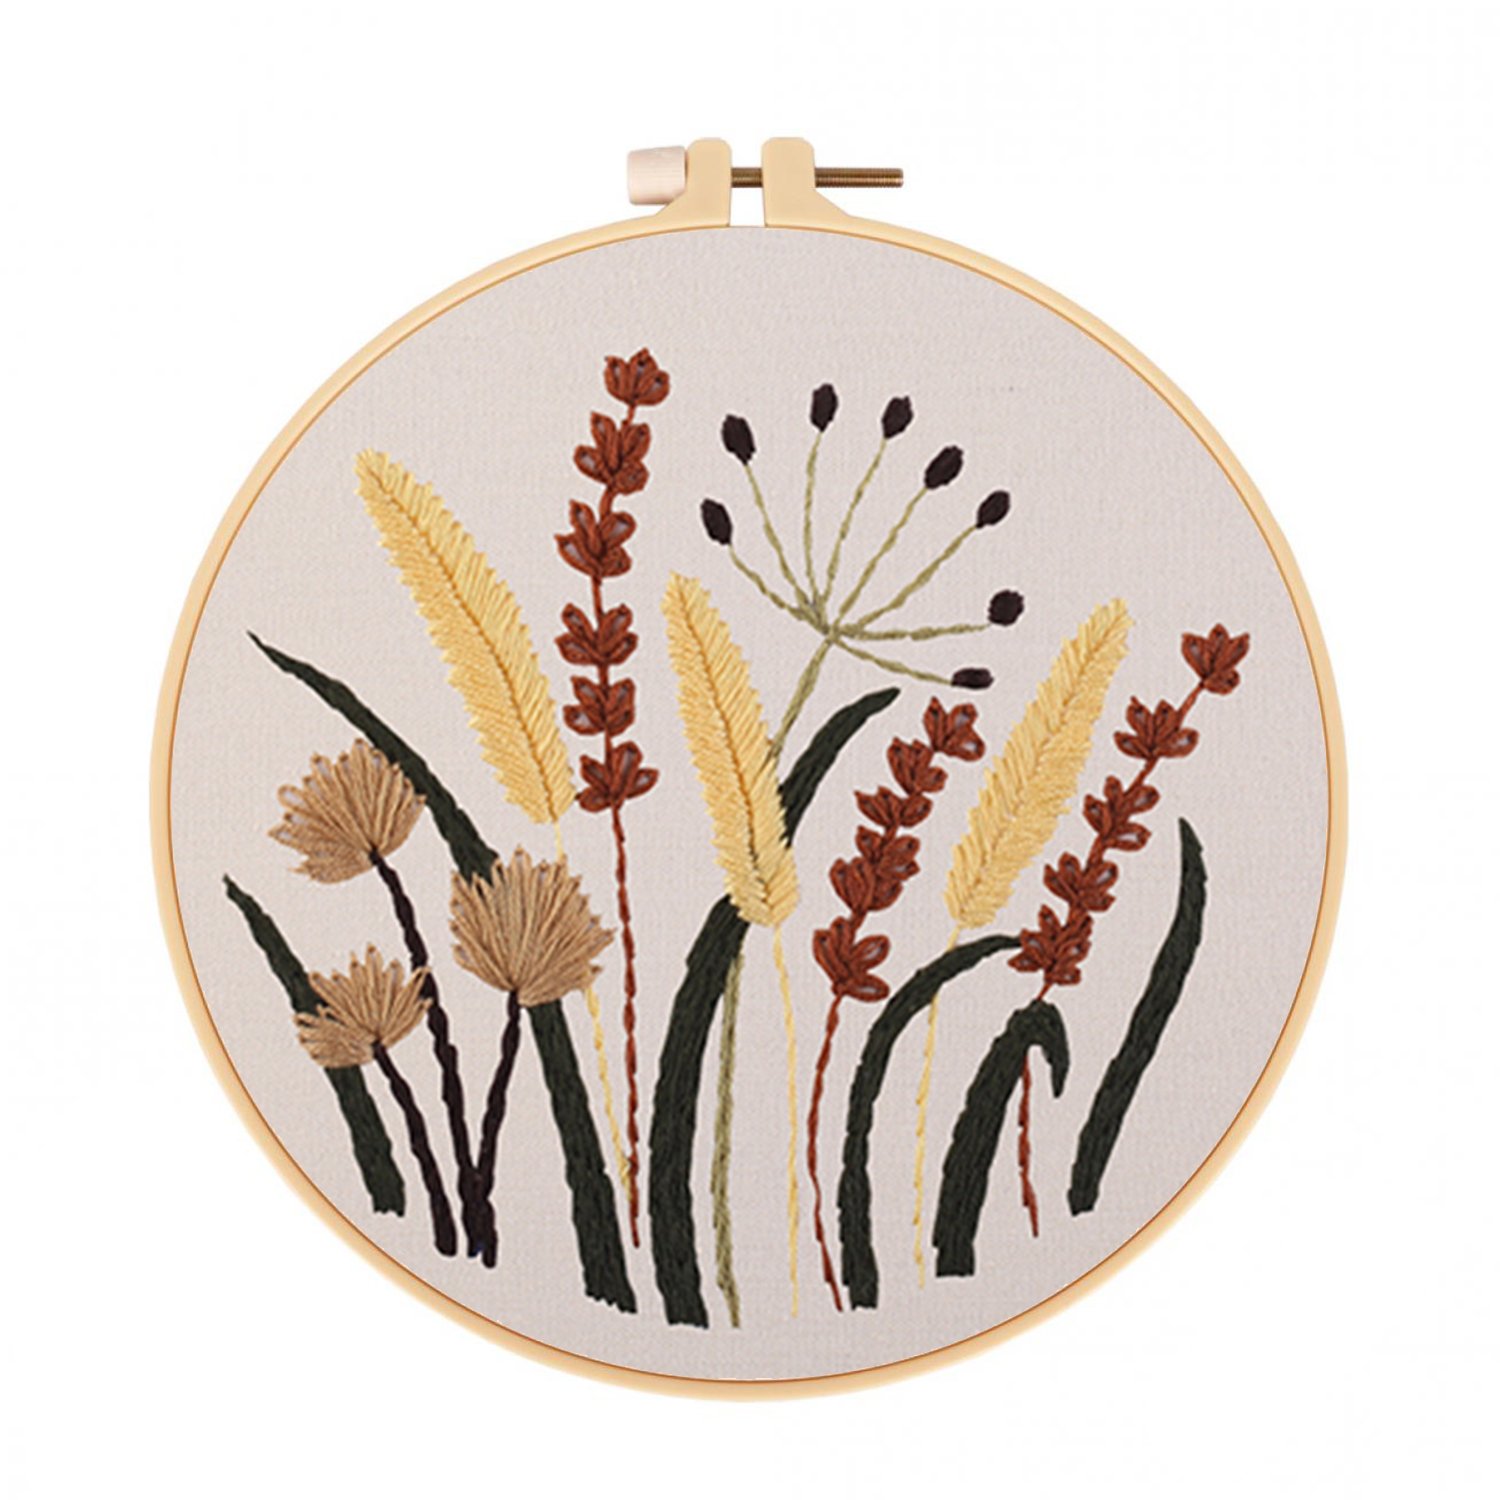 Embroidery Kits Cross stitch kits beginner for Adult Beginner  Handmade Art Craft Embroidery